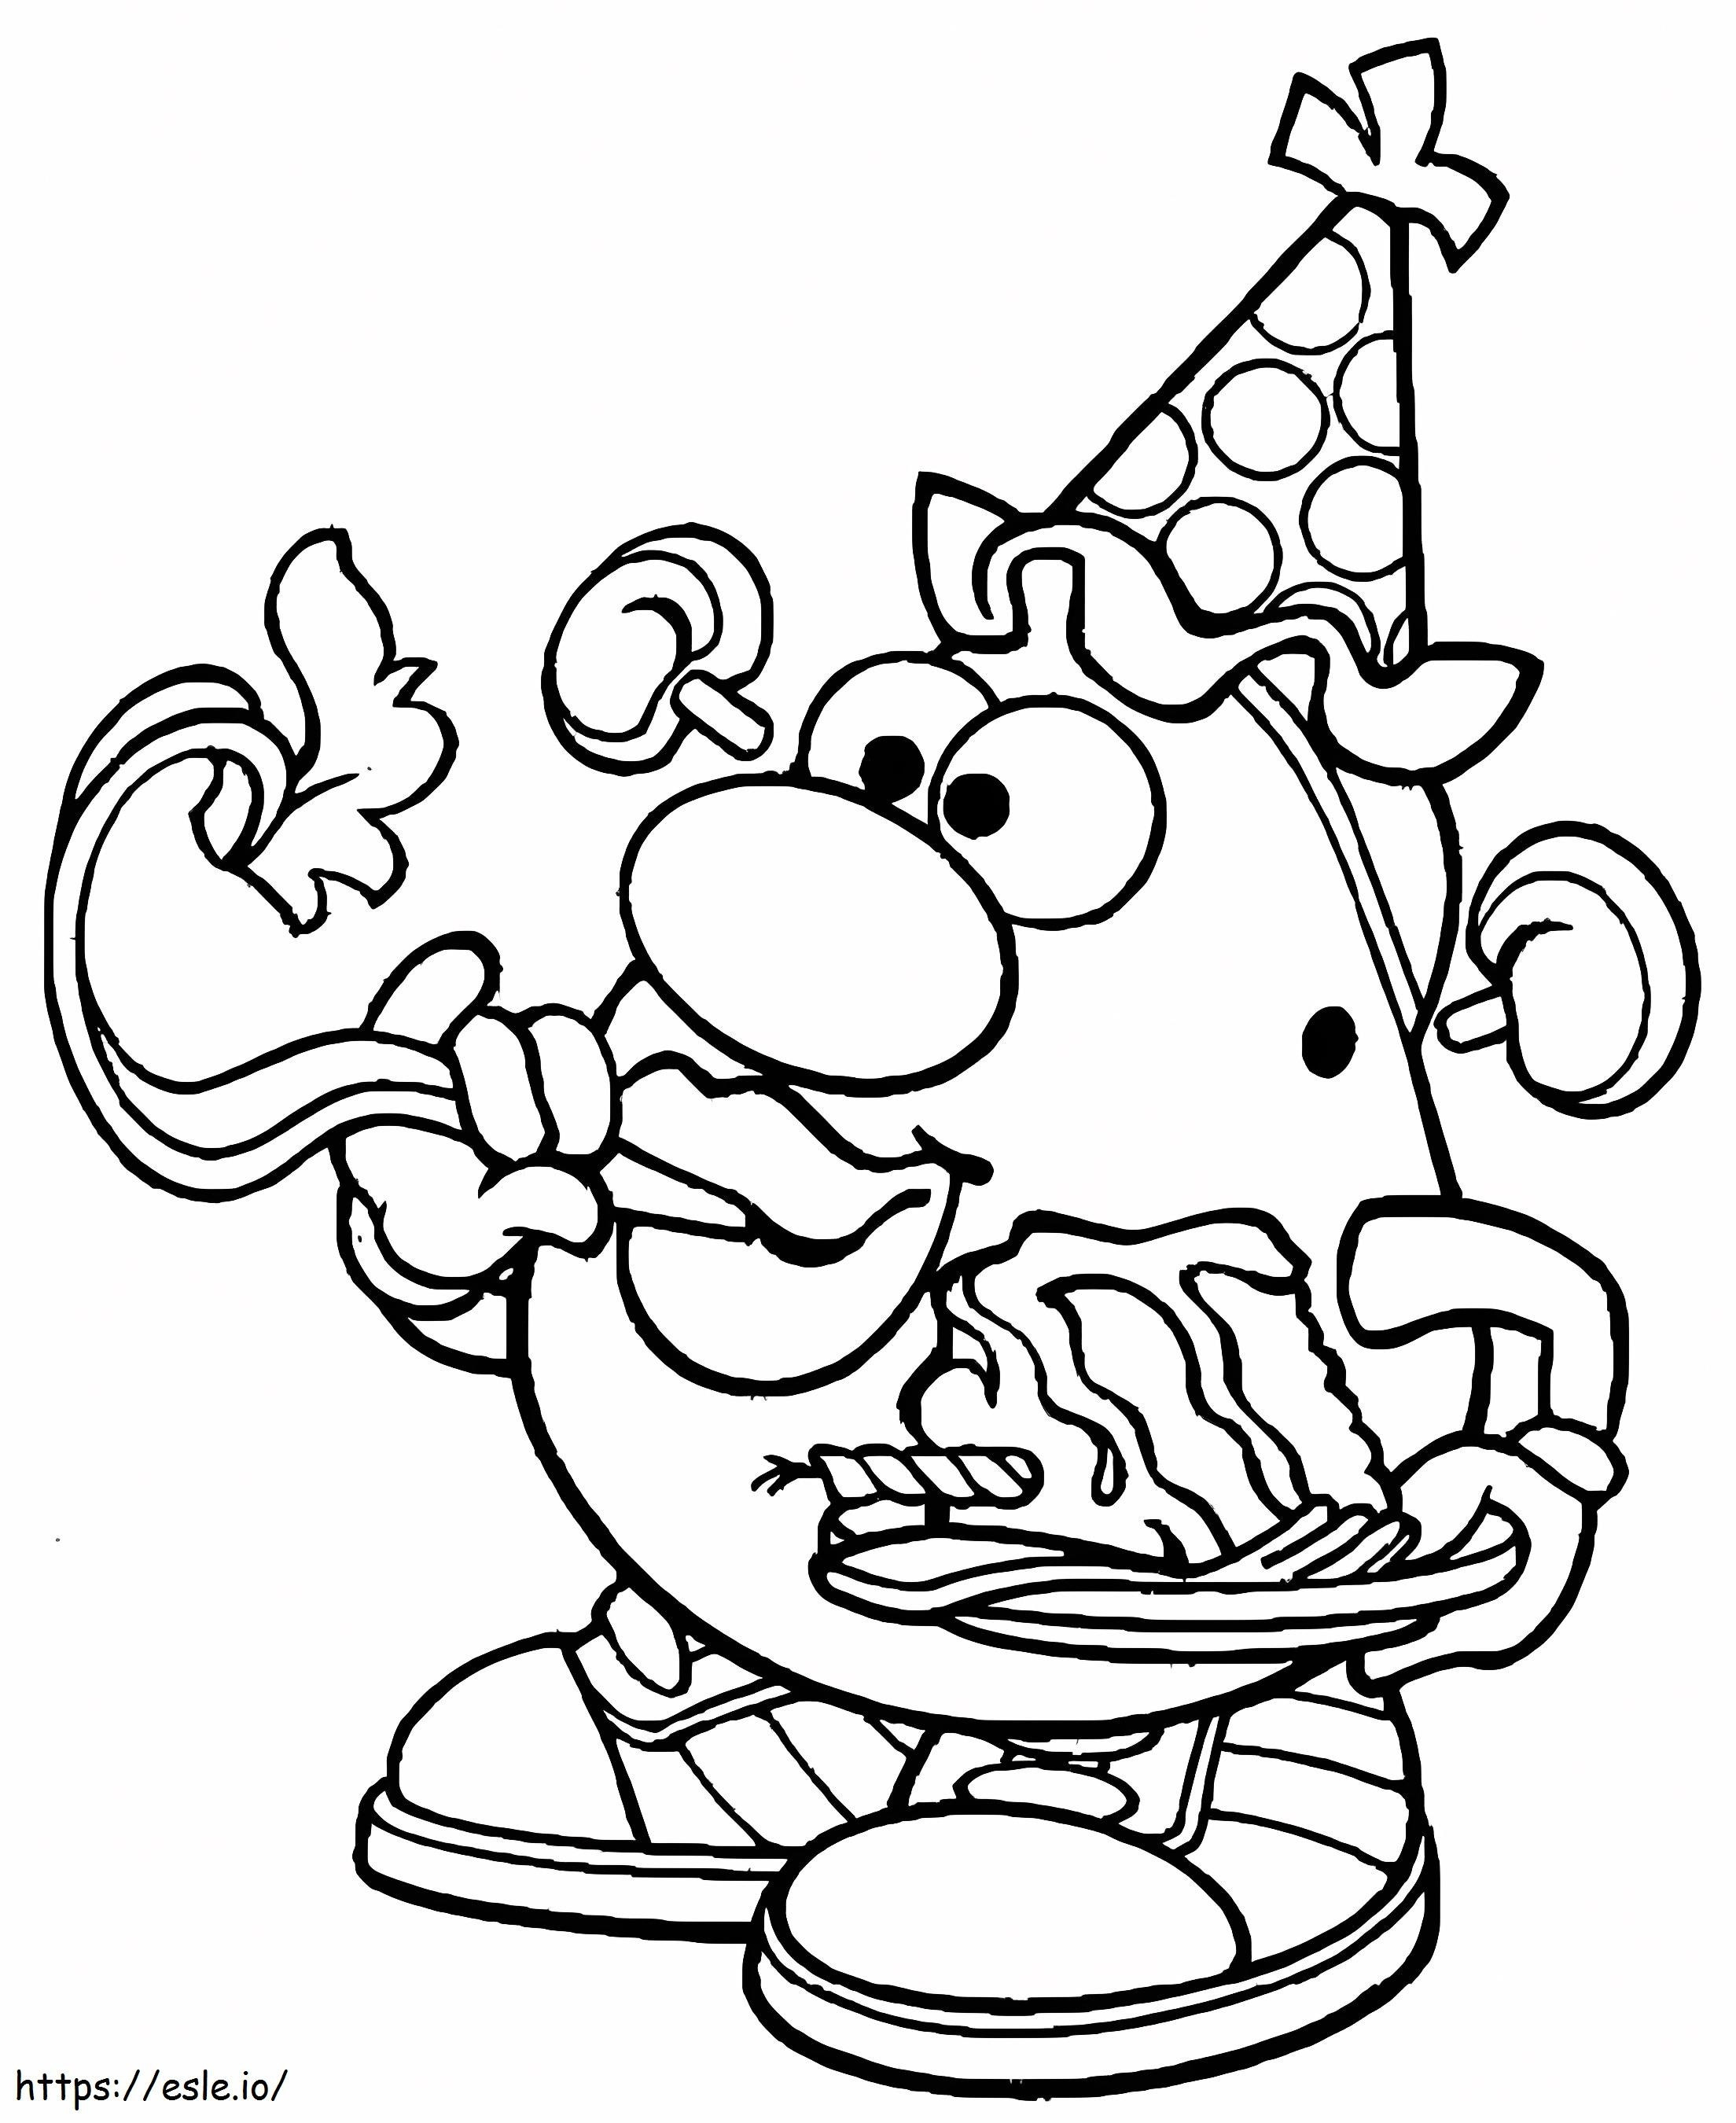 Party With Mr. Potato Head coloring page